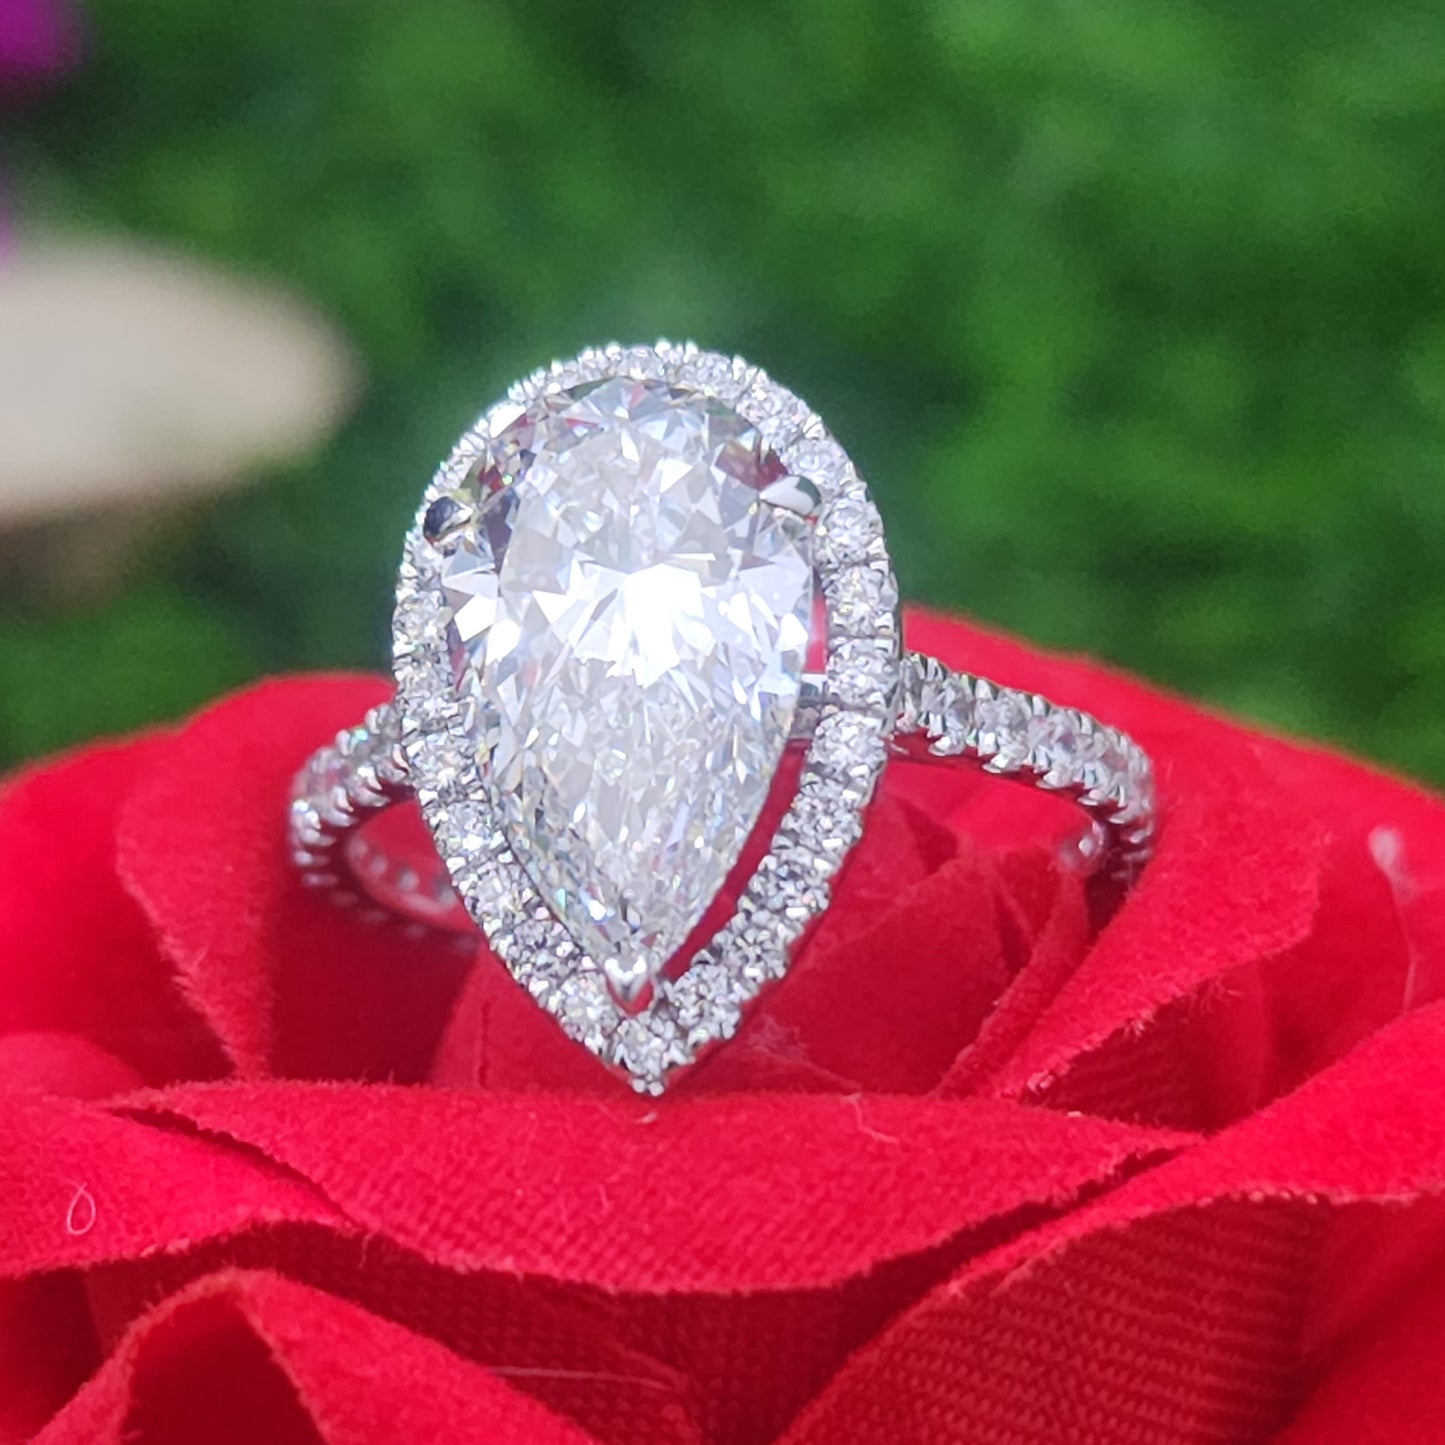 Pear-shaped Halo Engagement Ring with a Diamond White gold Ring